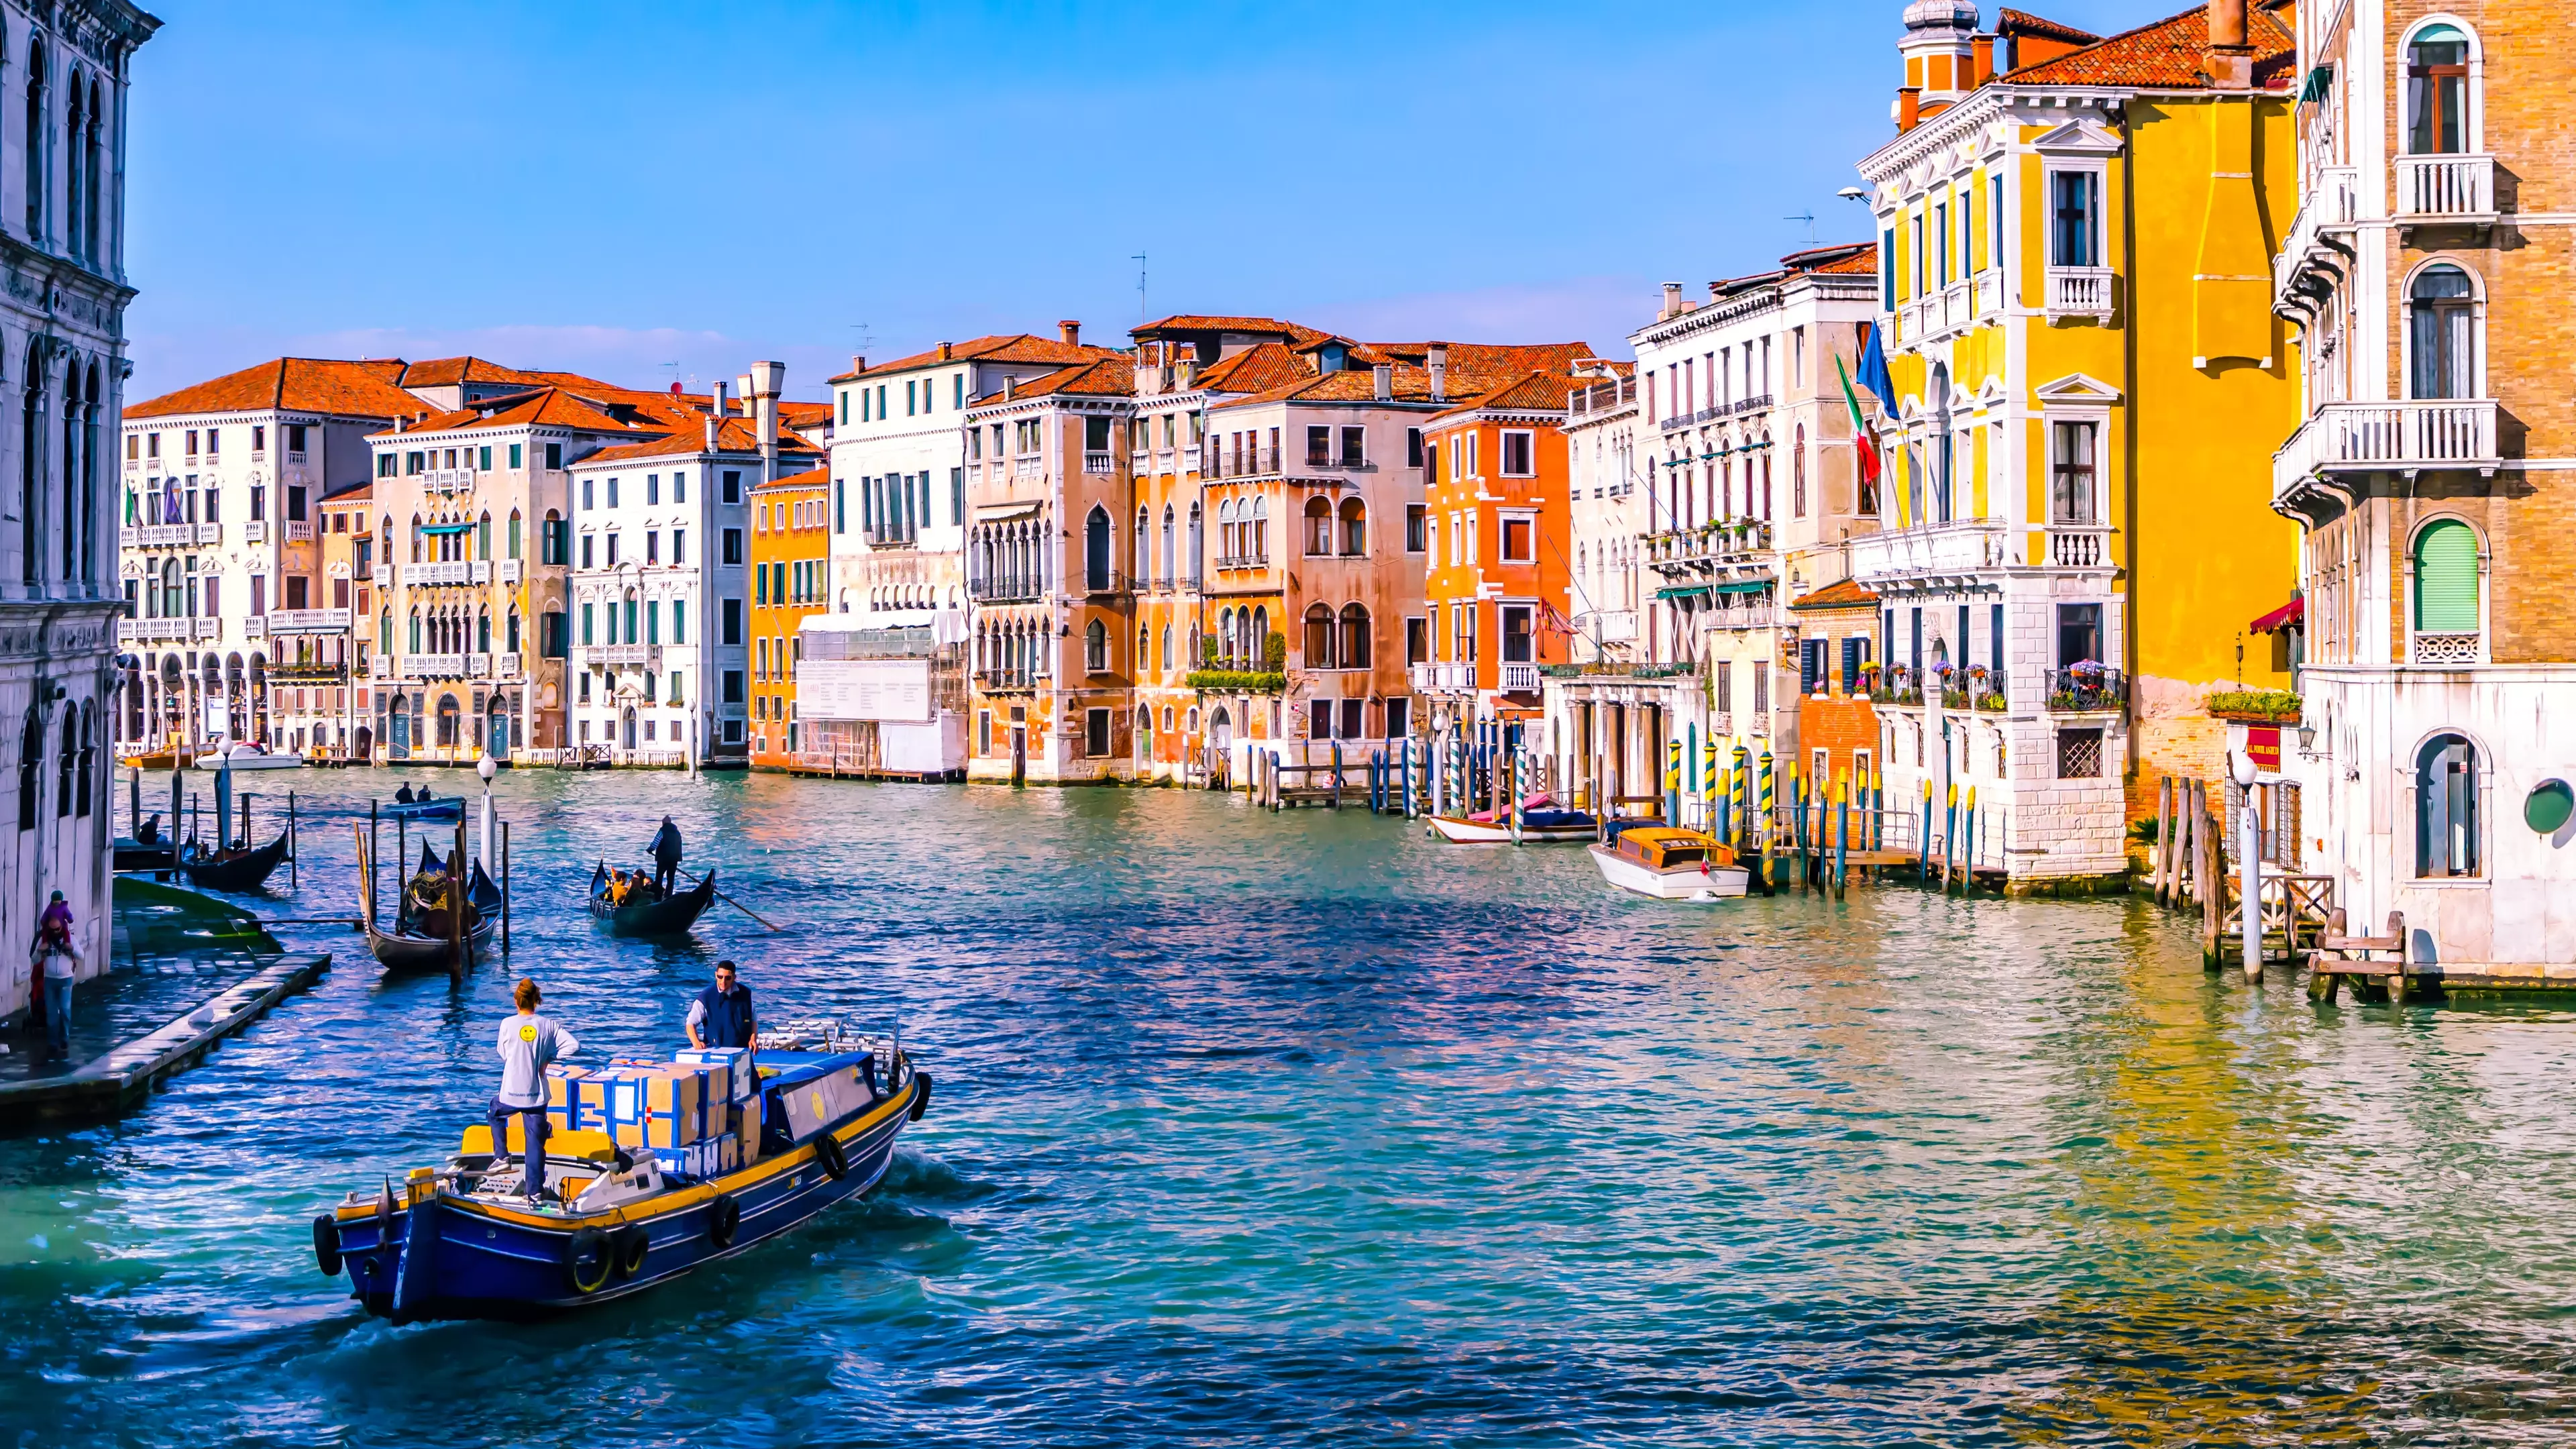 You can snap up flights and a 2-night stay in Venice for £99pp (